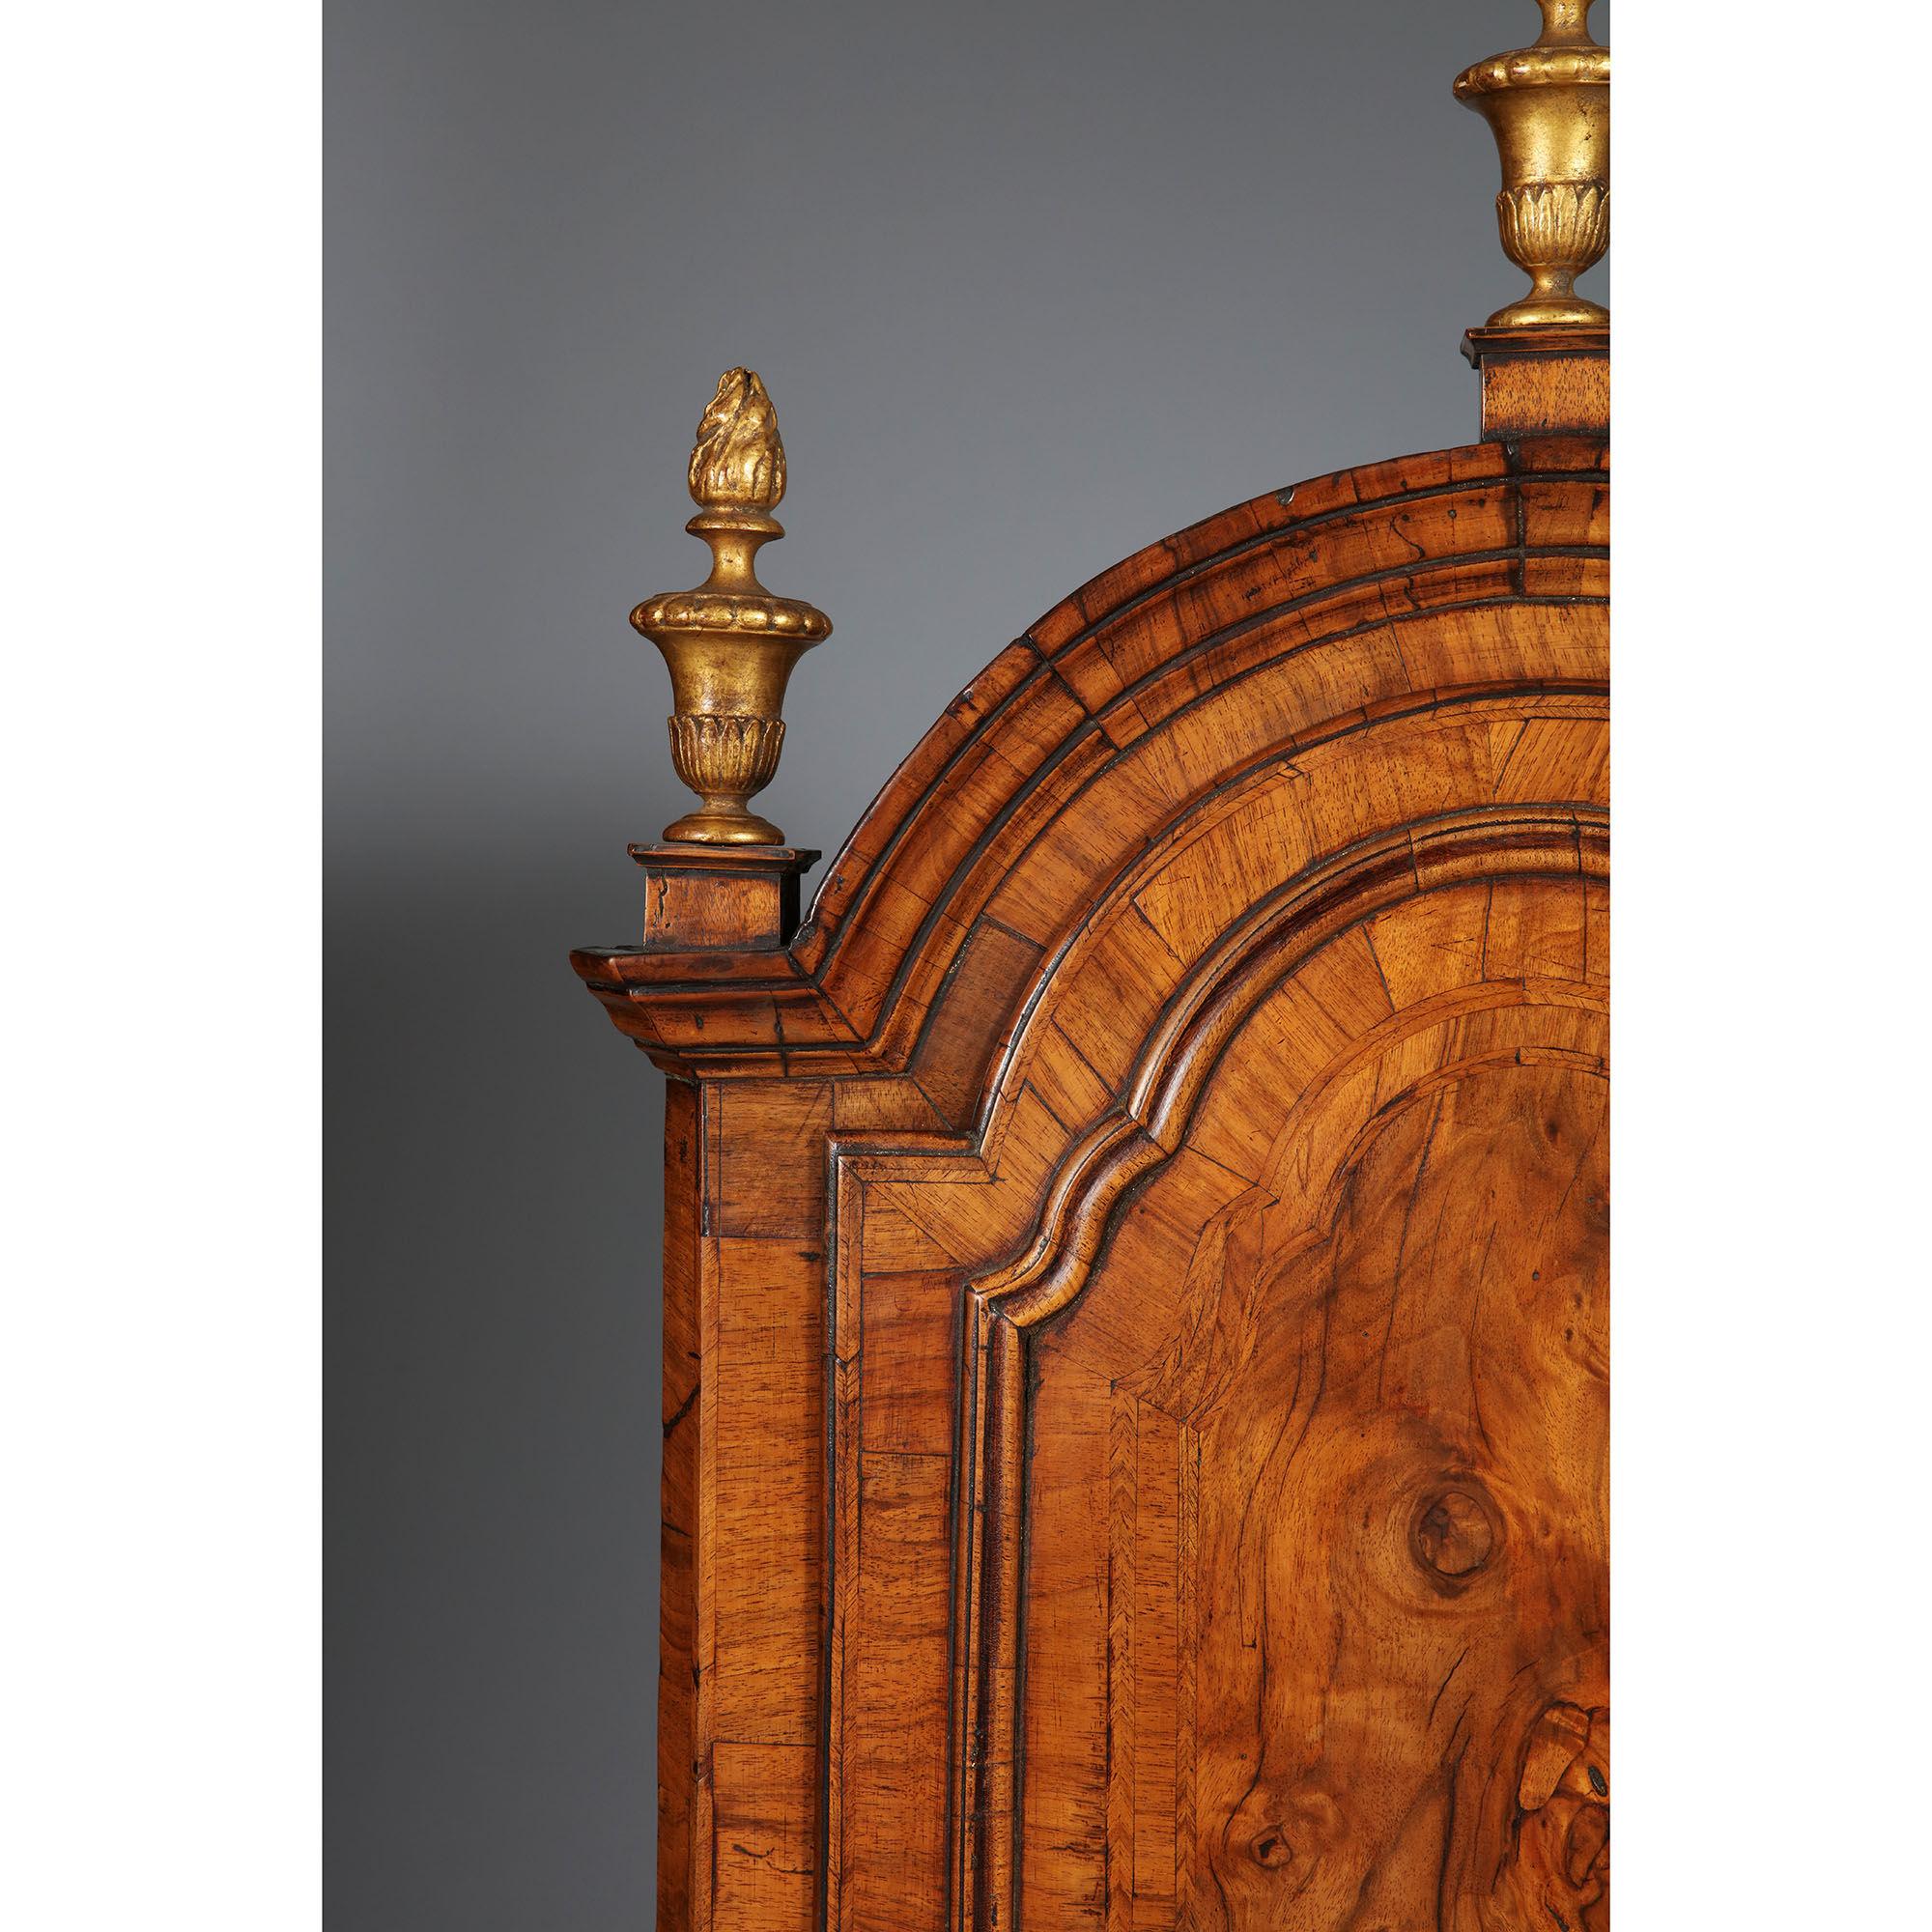 A superb and rare Queen Anne (1702-1714) dome top break-arch corner cupboard, mounted with carved giltwood finials.

When you start to break down the details deployed by the designer/cabinet maker, it shows how accomplished the technical aspects